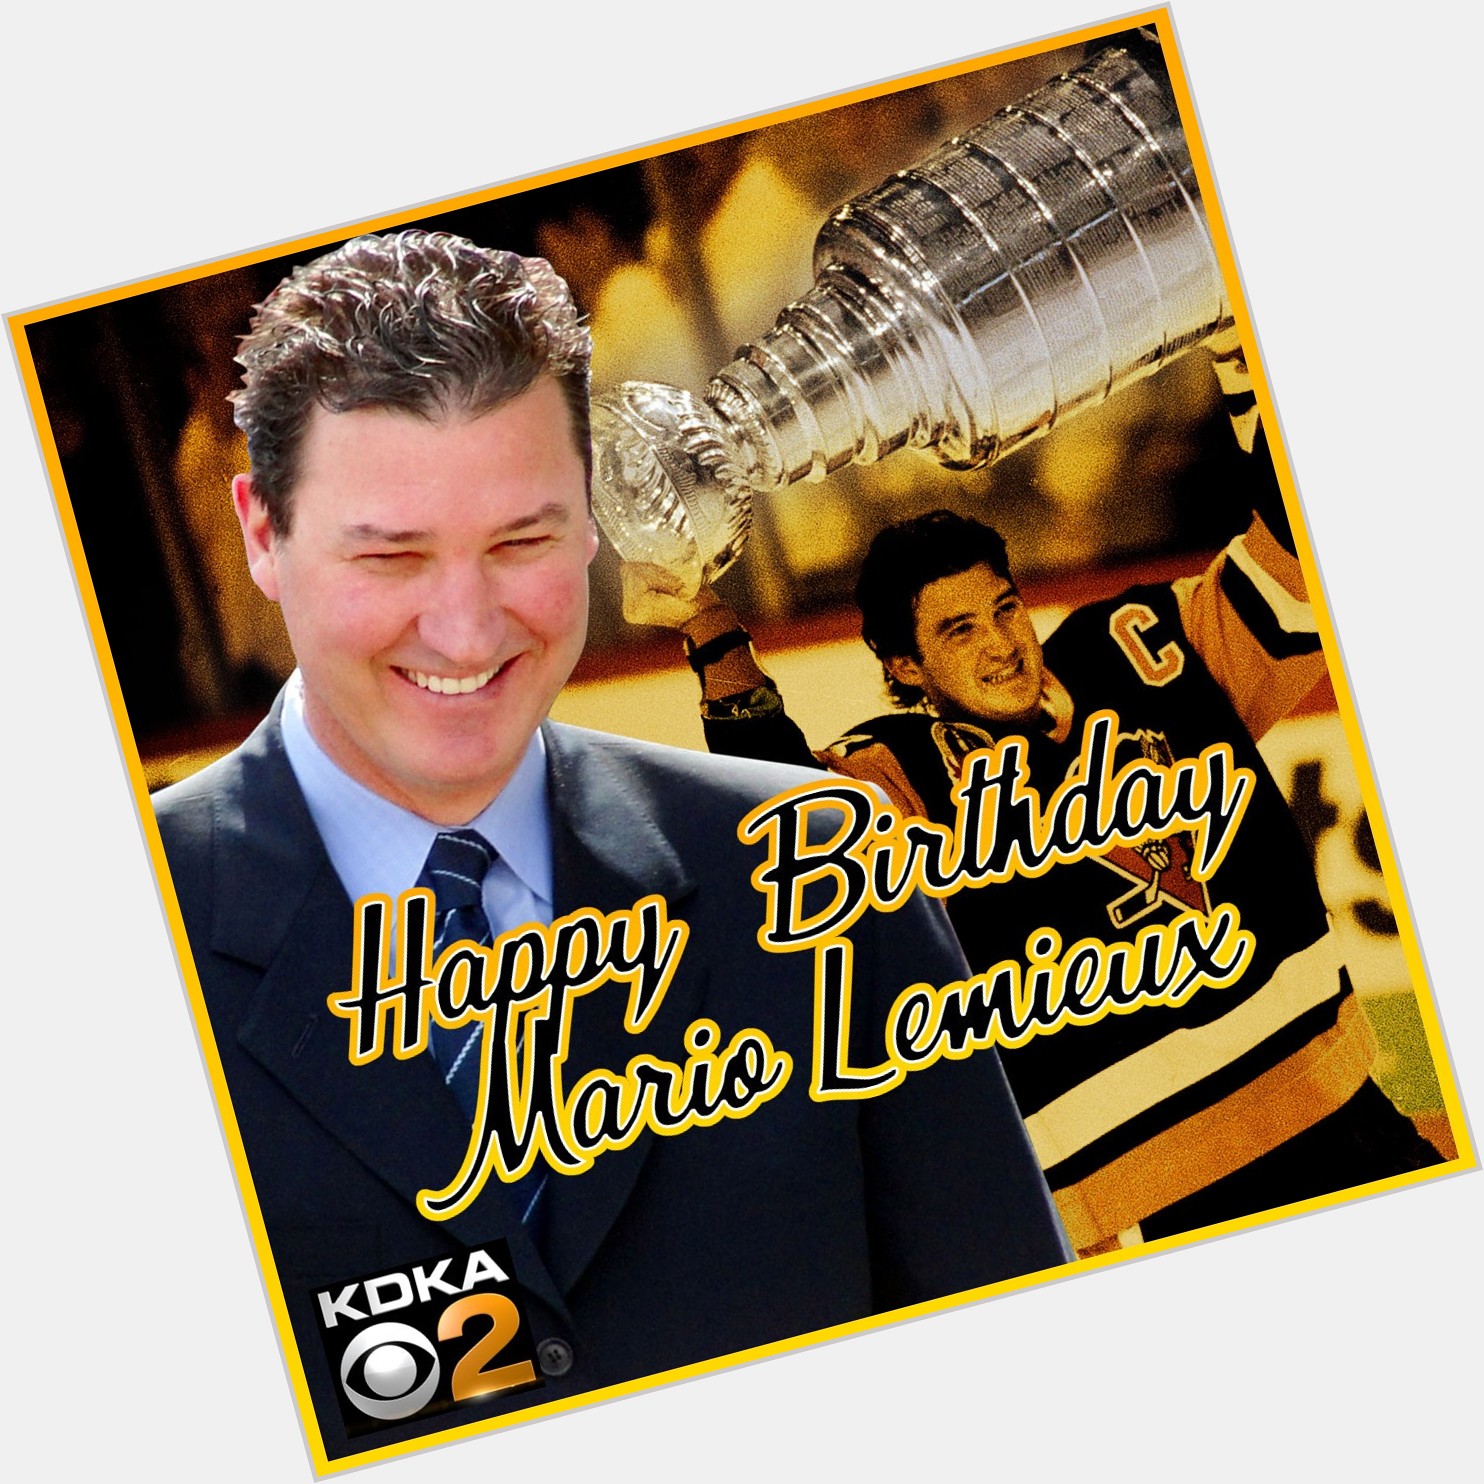 66 TURNS 56: Happy birthday to Penguins all-time great Mario Lemieux, who celebrates his 56th birthday today!  